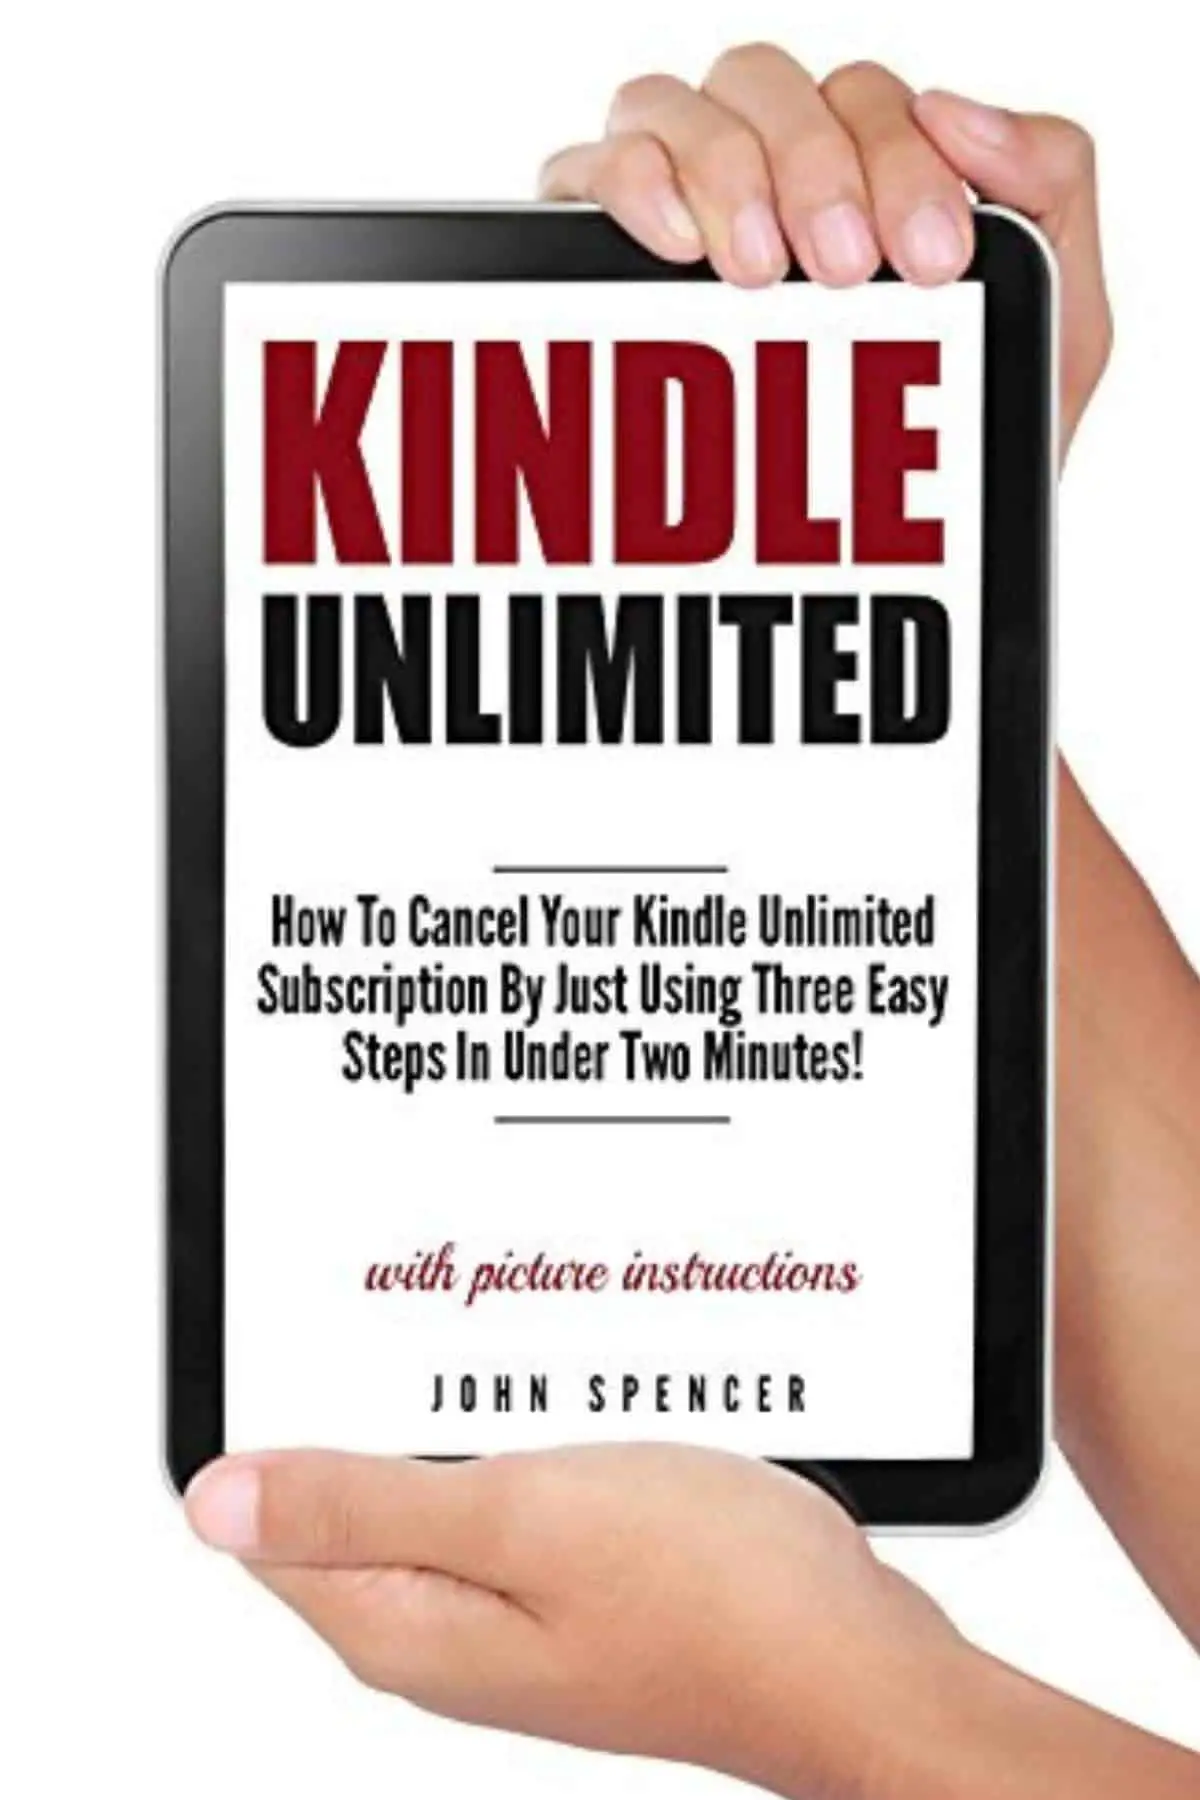 Kindle Unlimited: How To Cancel Your Kindle Unlimited Subscription By Just Using Three Easy Steps In Under Two Minutes (A Short Guide On Canceling Your Kindle Unlimited Subscription In No Time) by John Spencer | Amazon's Best Selling Tech Kindle eBooks